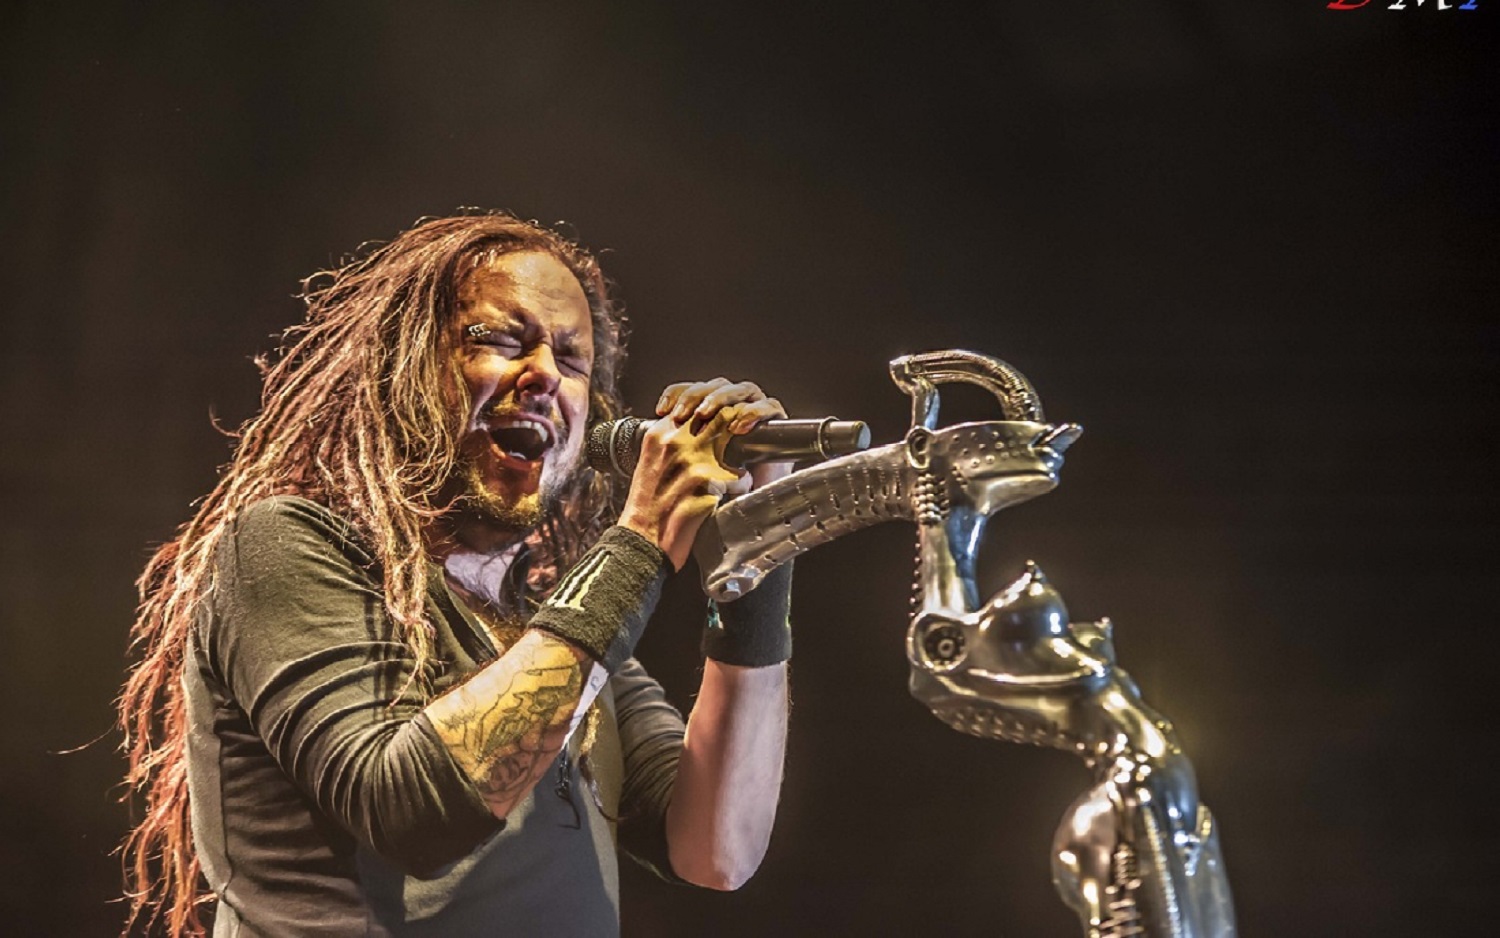 Return of the Dreads (Korn/Zombie) - White River Amphitheater | MIRP